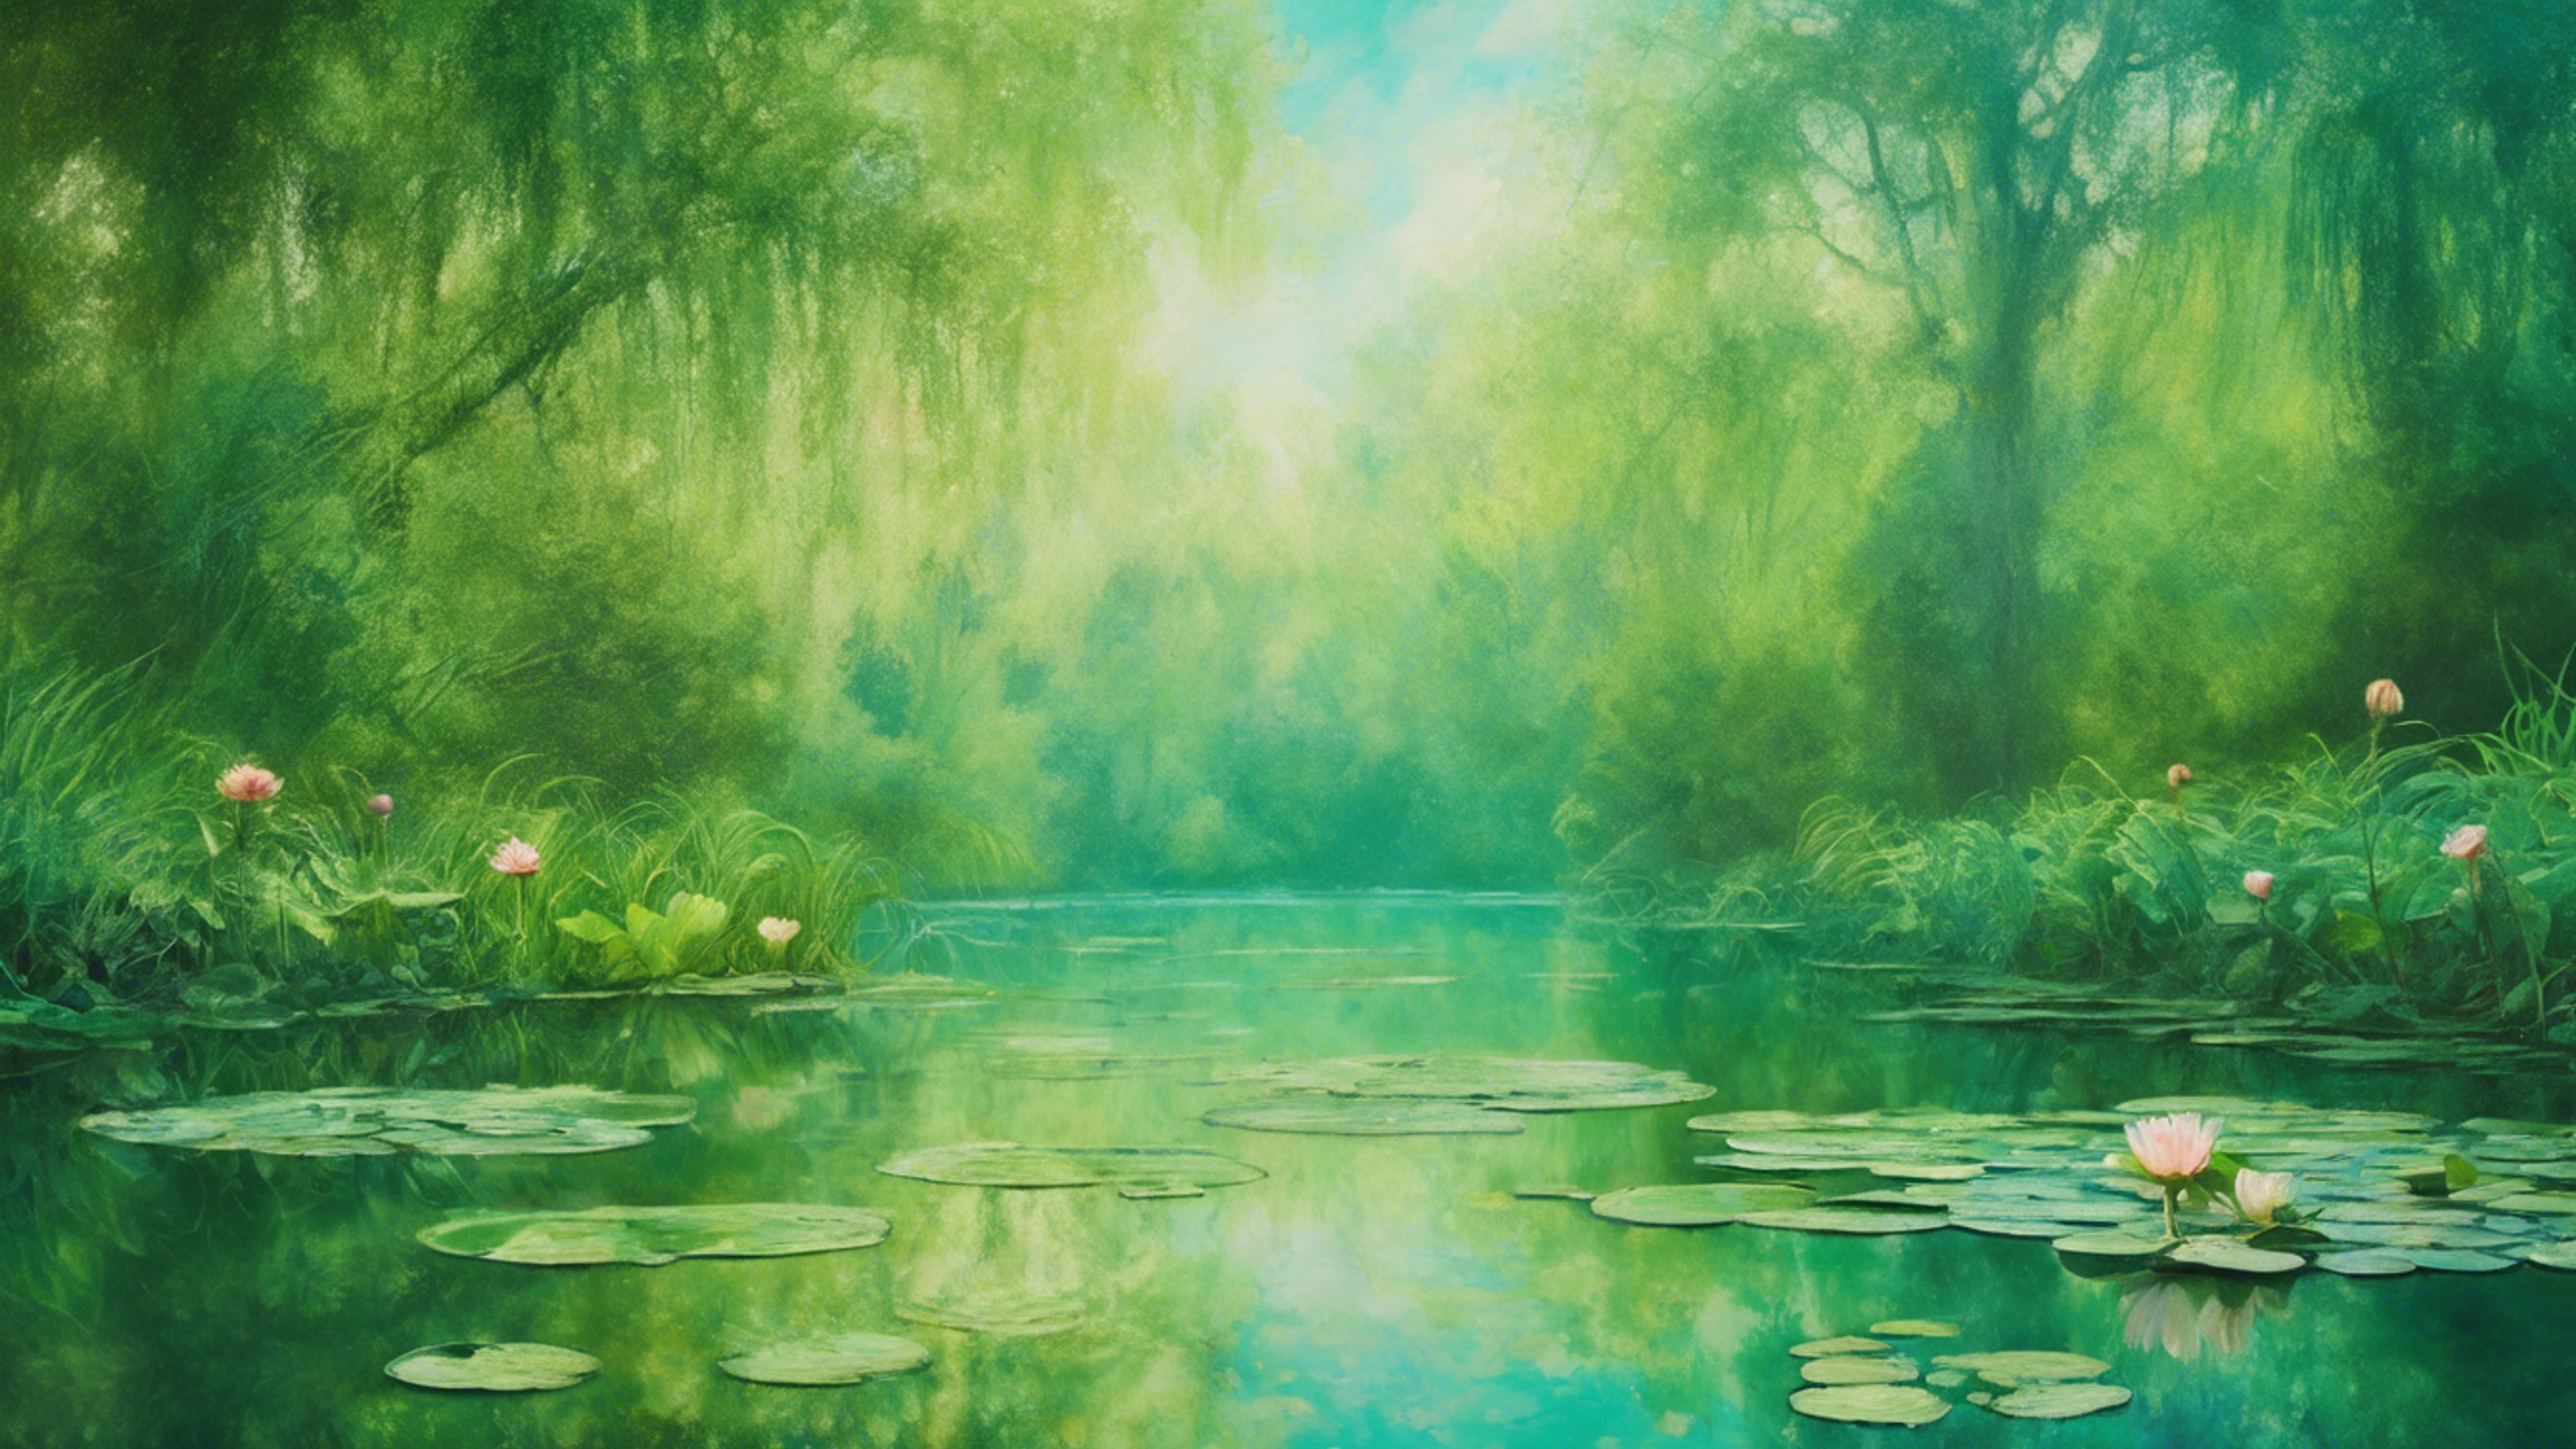 A landscape painting inspired by Monet's Water Lilies, with cool green hues. Hintergrund[9f0abb477fe746e08ba1]